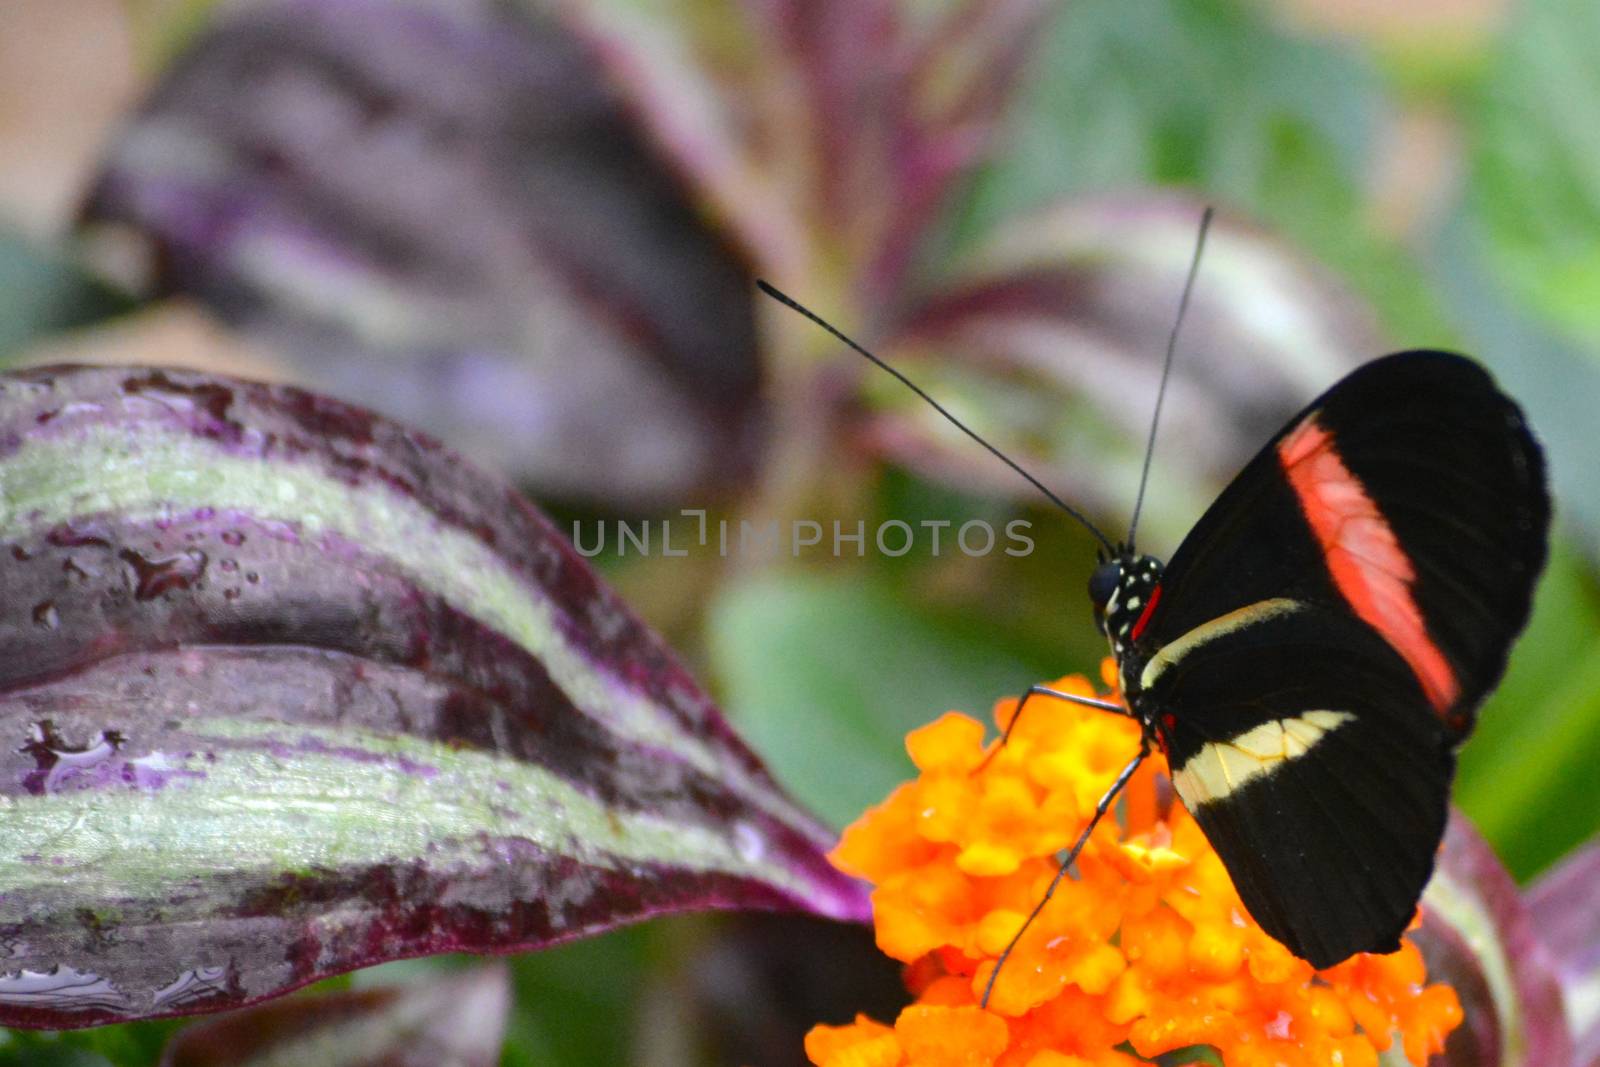 Butterfly living in a sanctuary  - 058 by RefocusPhoto